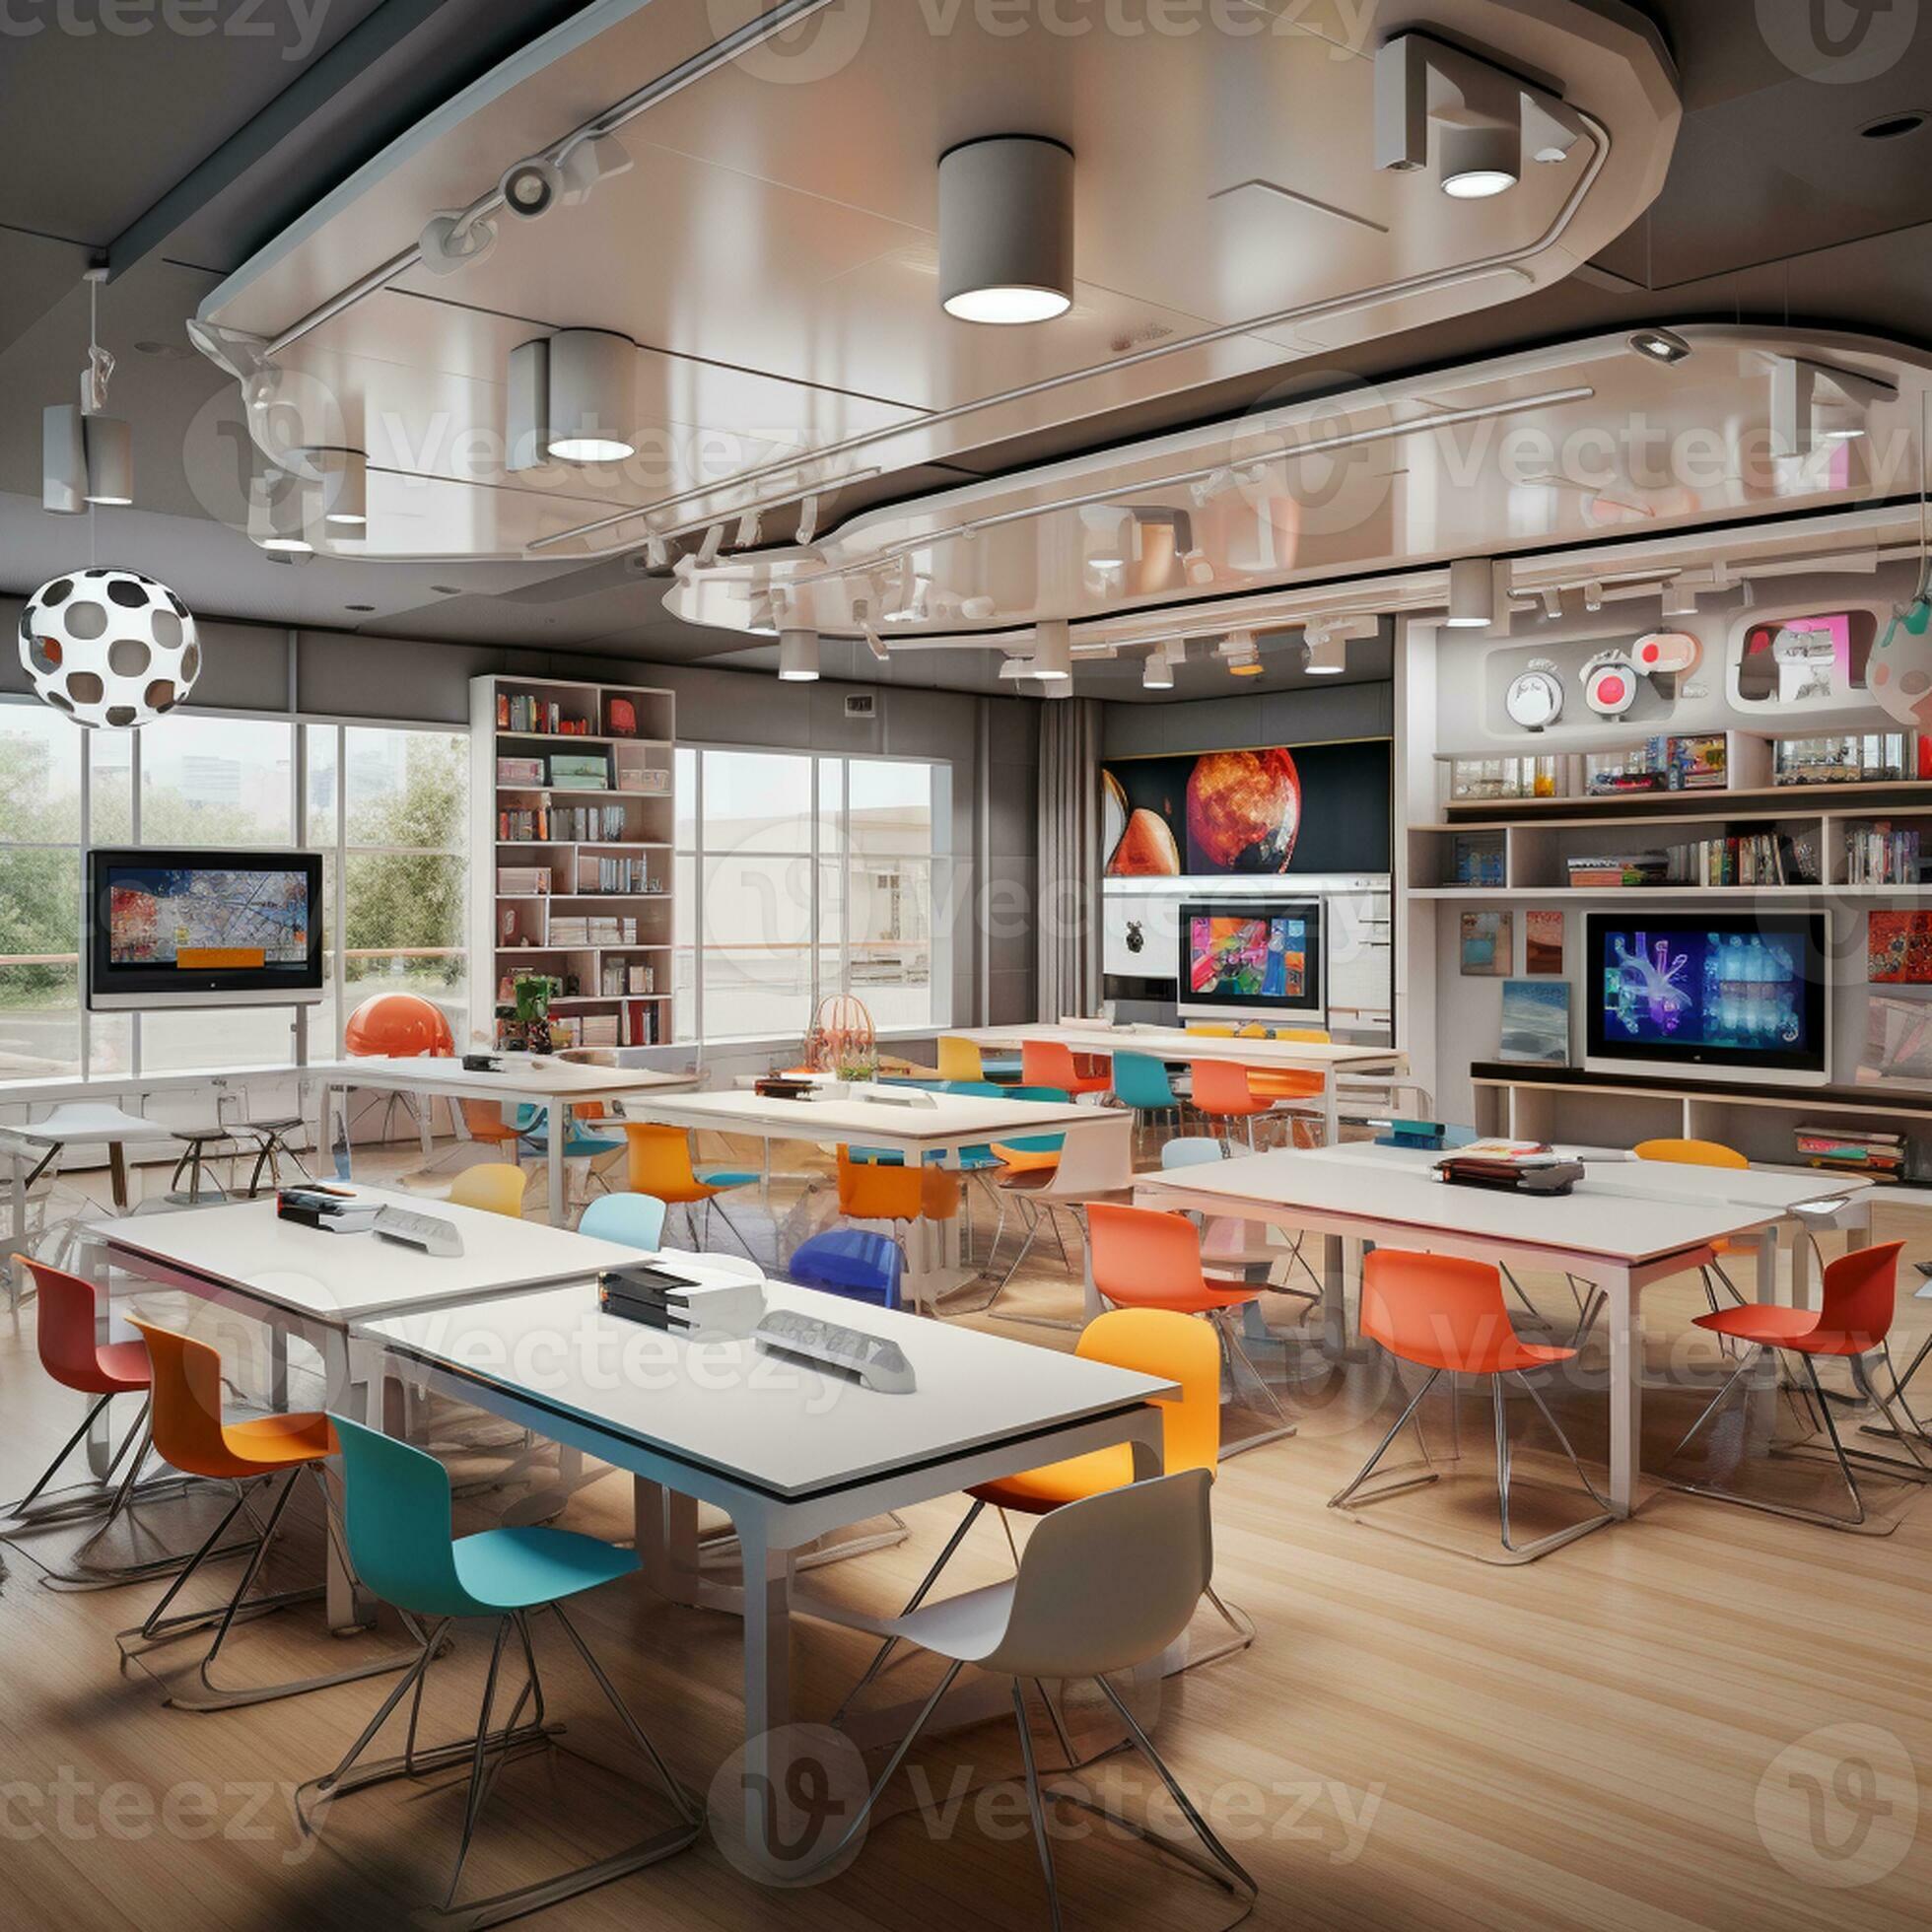 Transformative Learning Spaces: Future-Ready Approaches